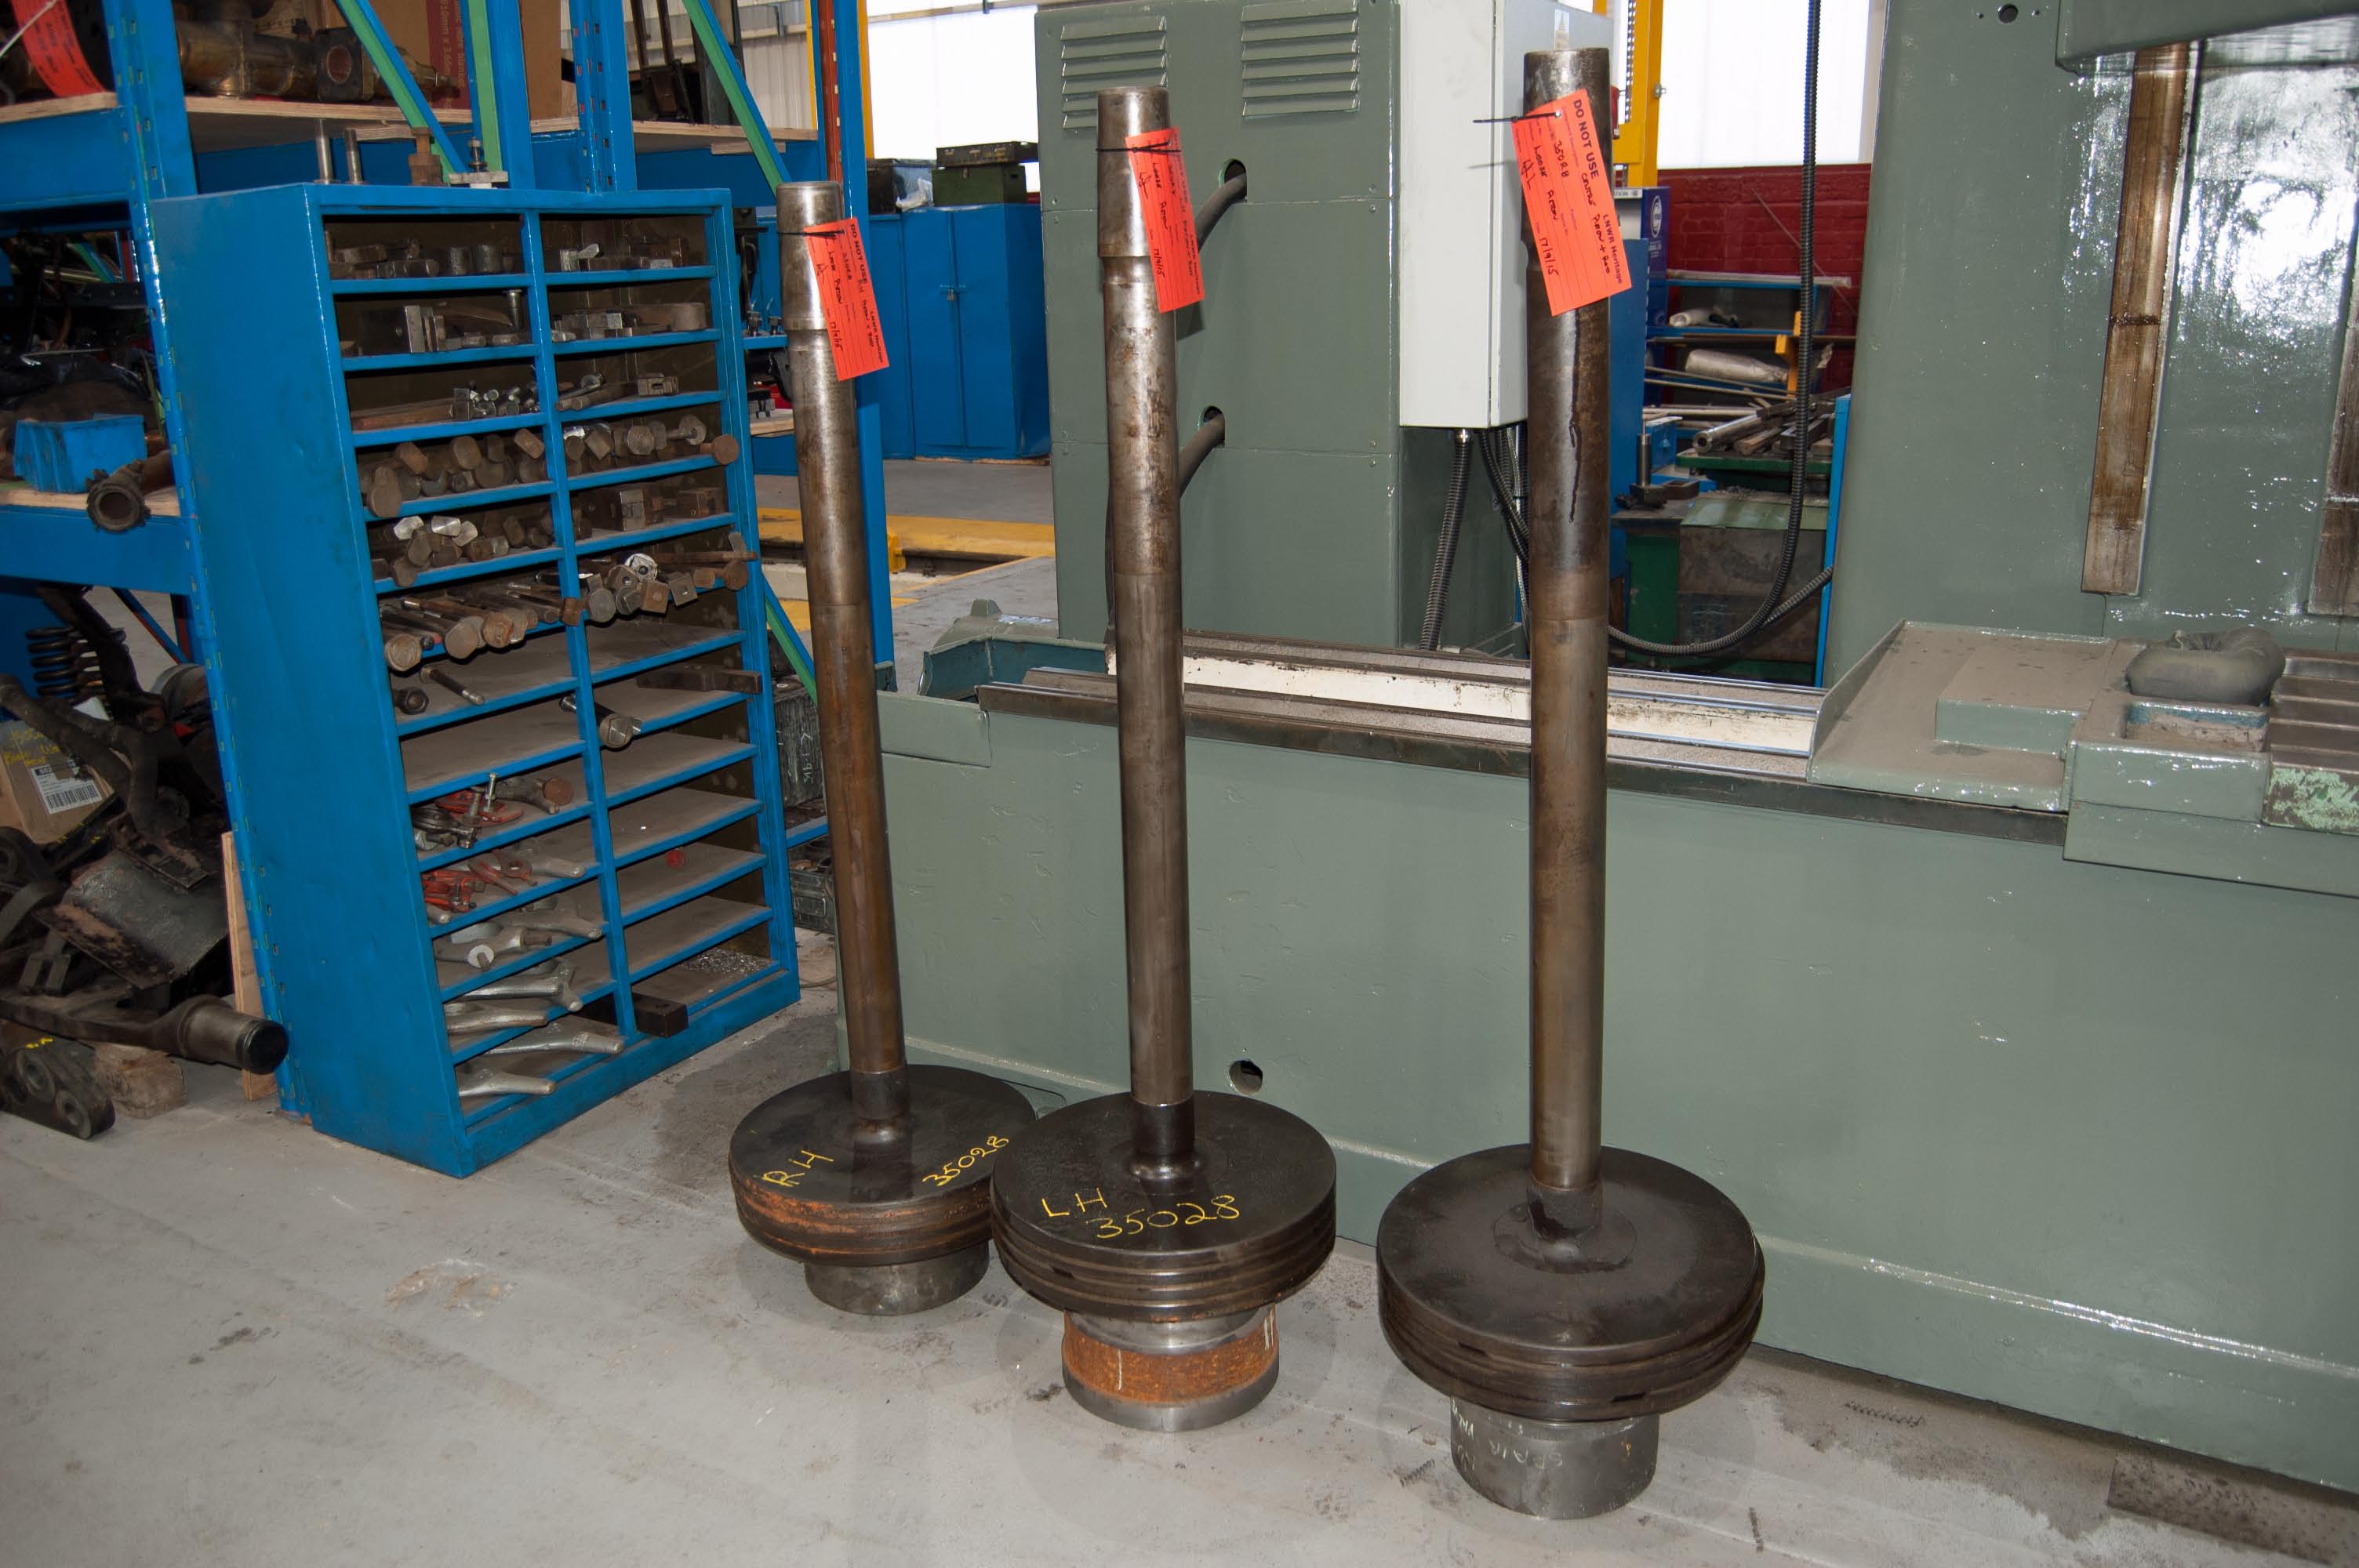 The three removed pistons